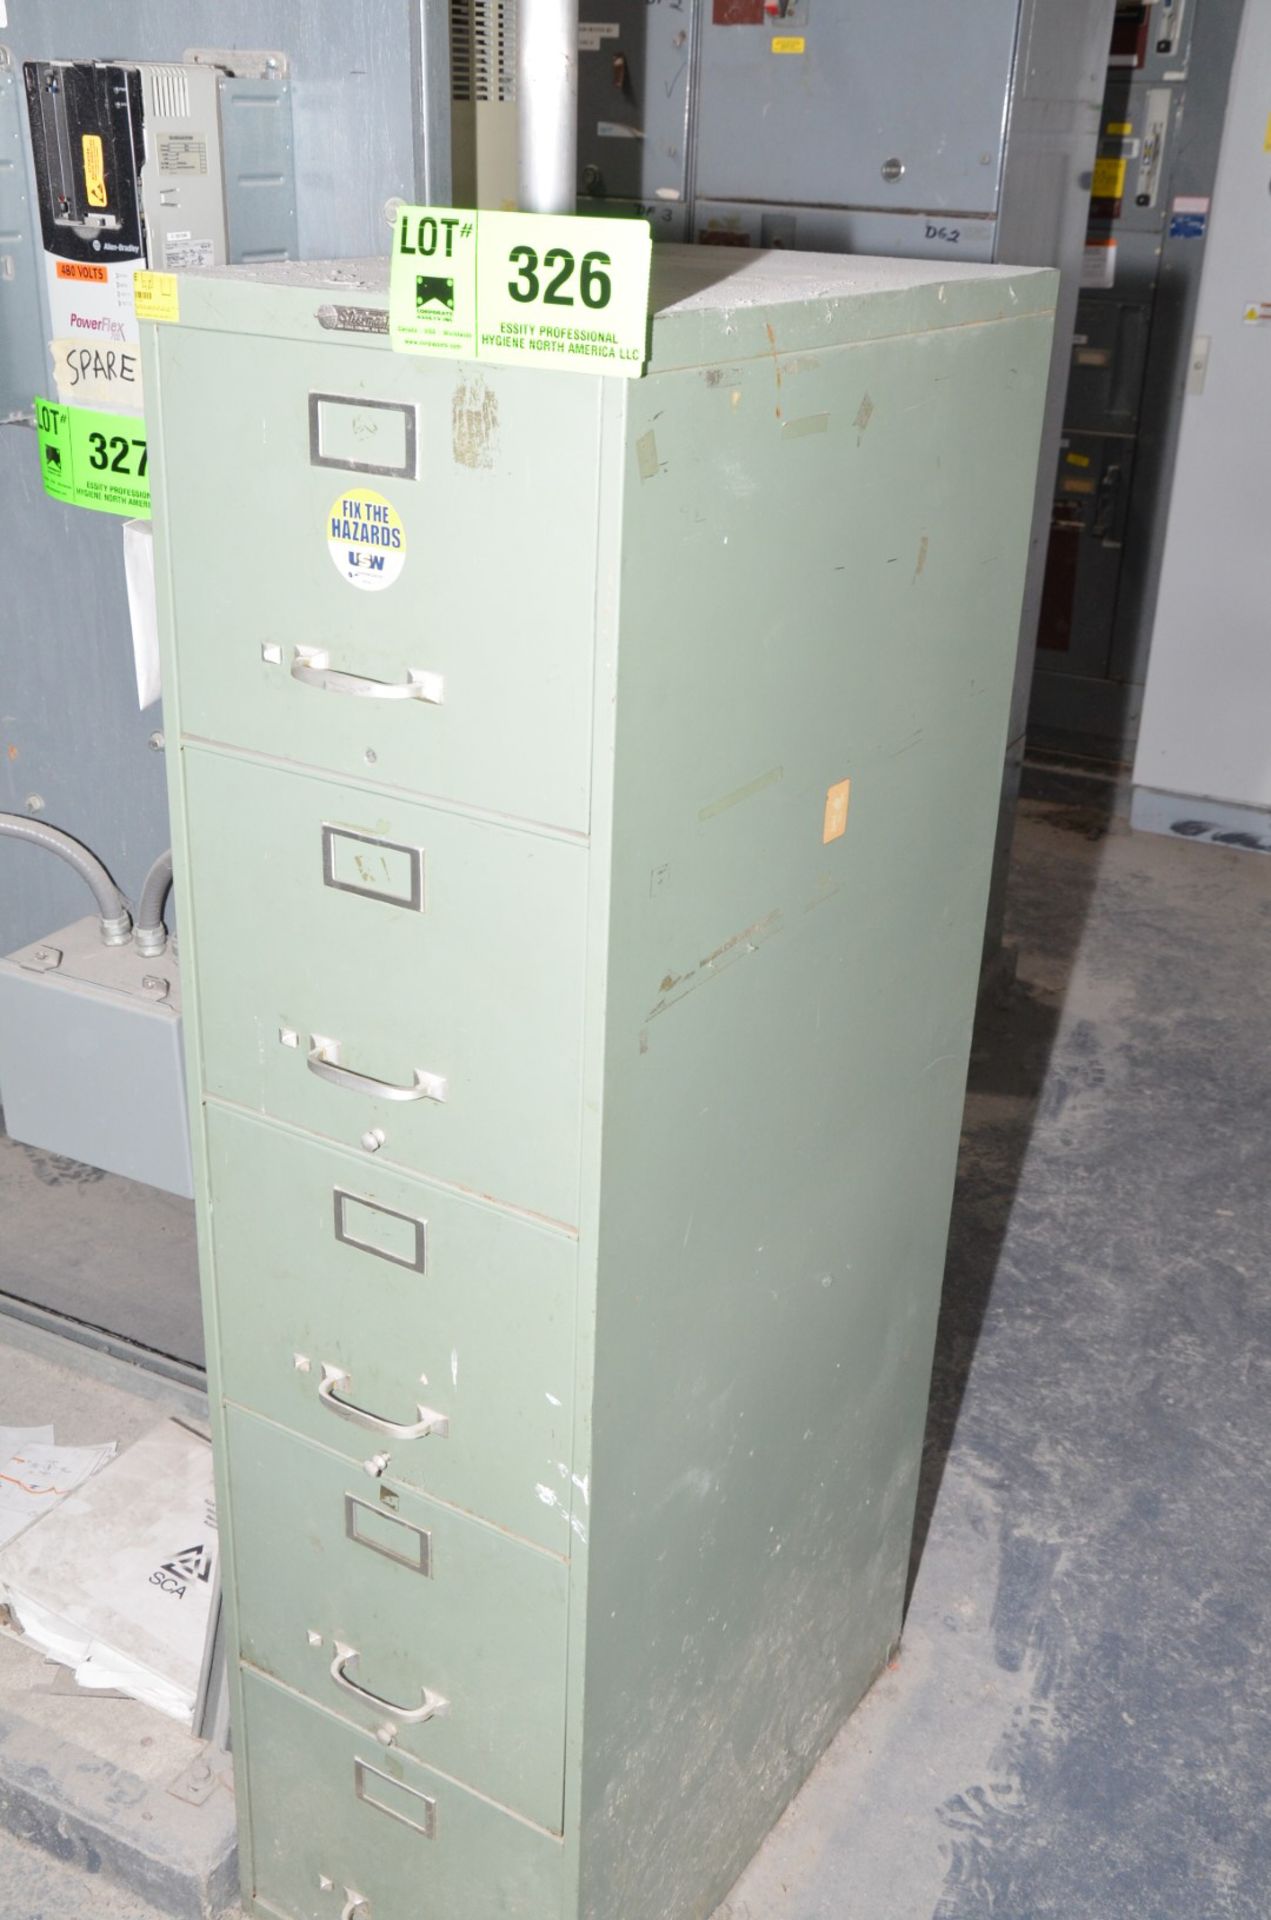 LOT/ CABINET WITH SPARE PARTS AND FUSES [RIGGING FEE FOR LOT #326 - $50 USD PLUS APPLICABLE TAXES]